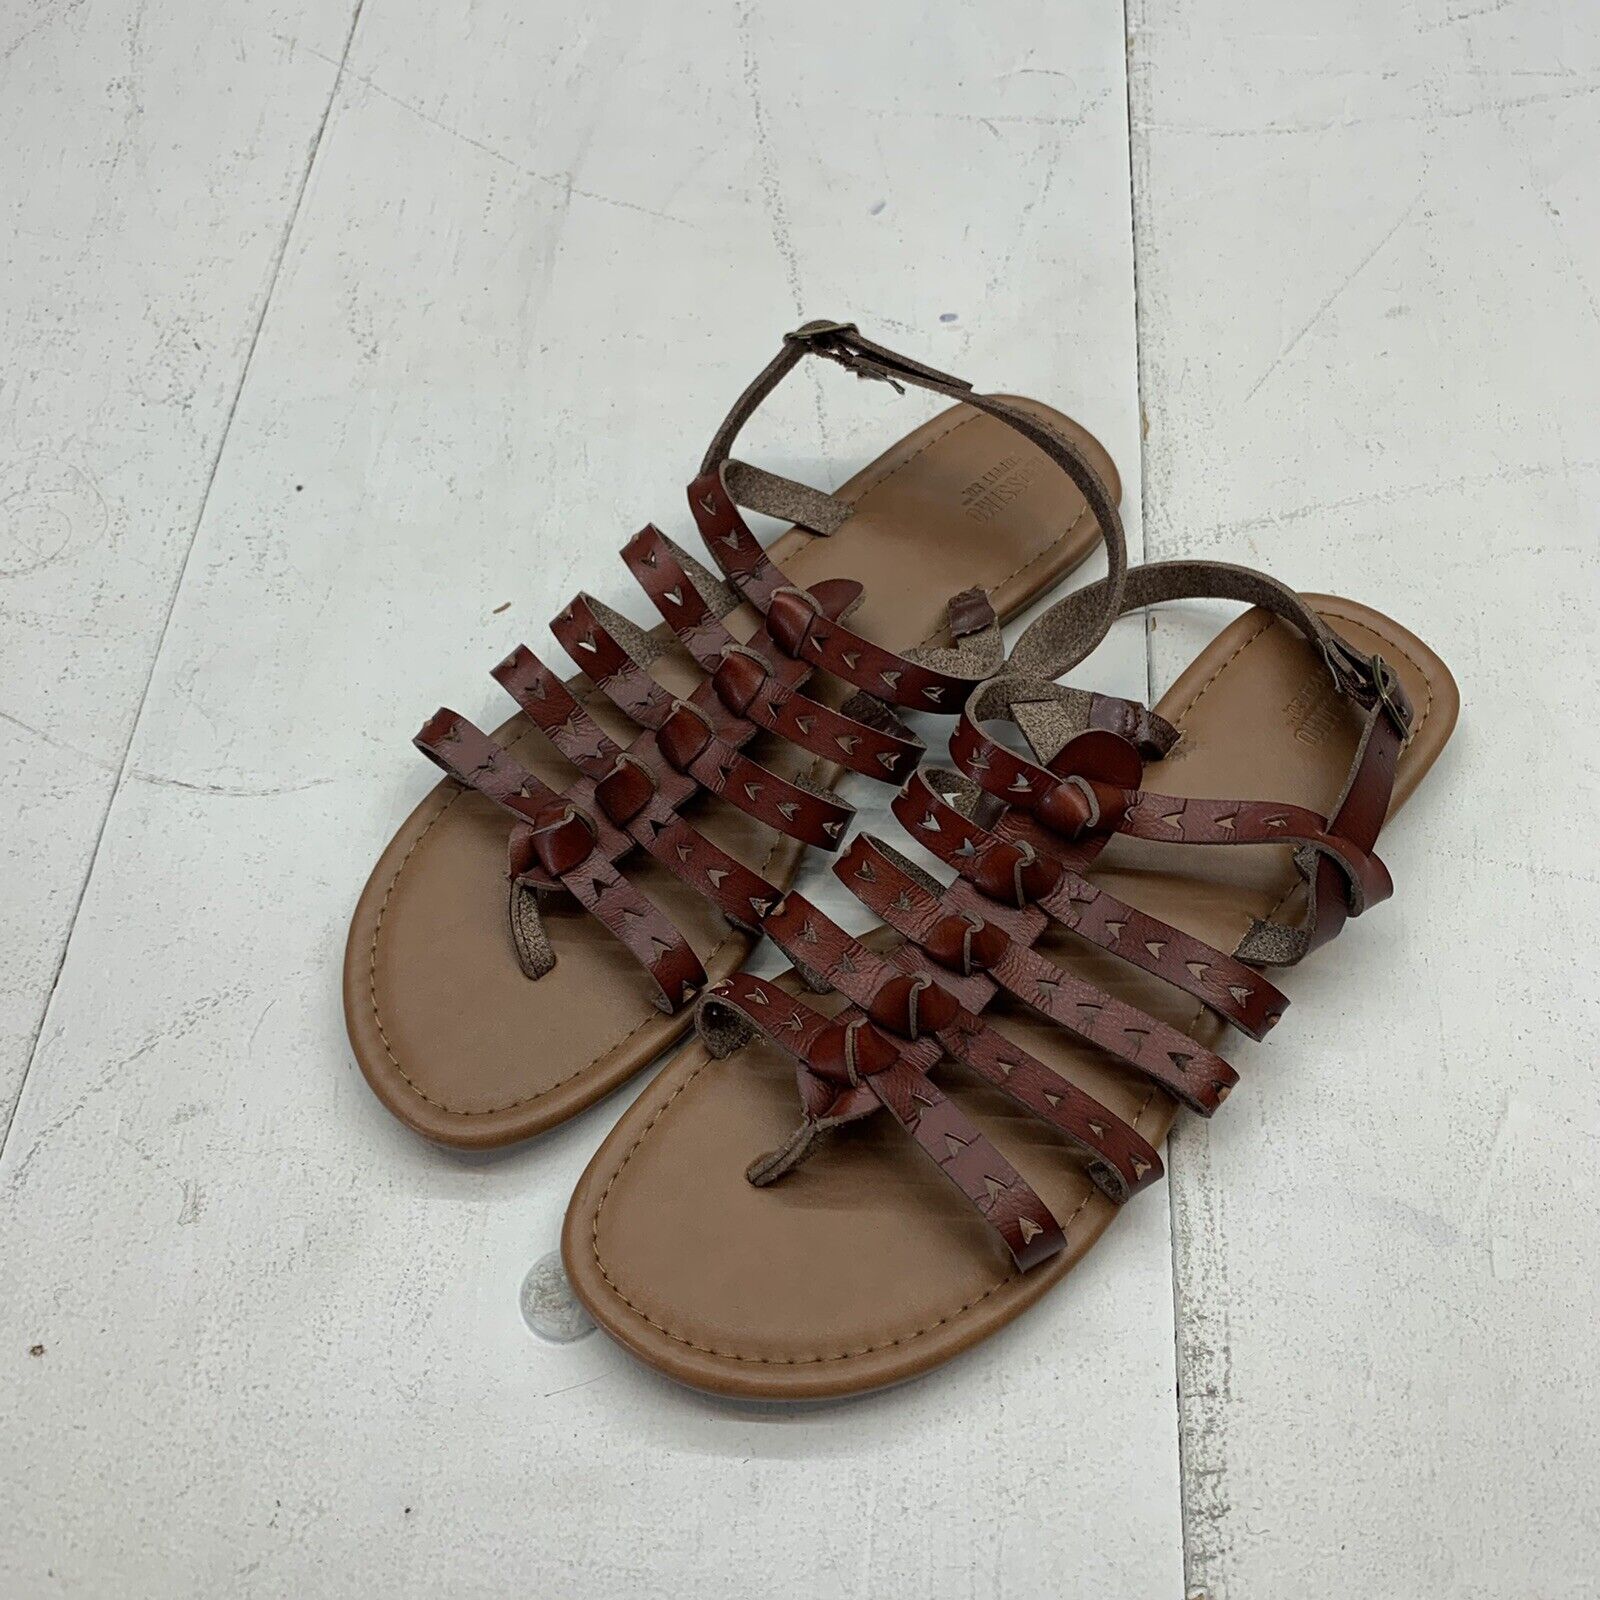 Mossimo Womens Brown Leather Sandals Size 11 - beyond exchange